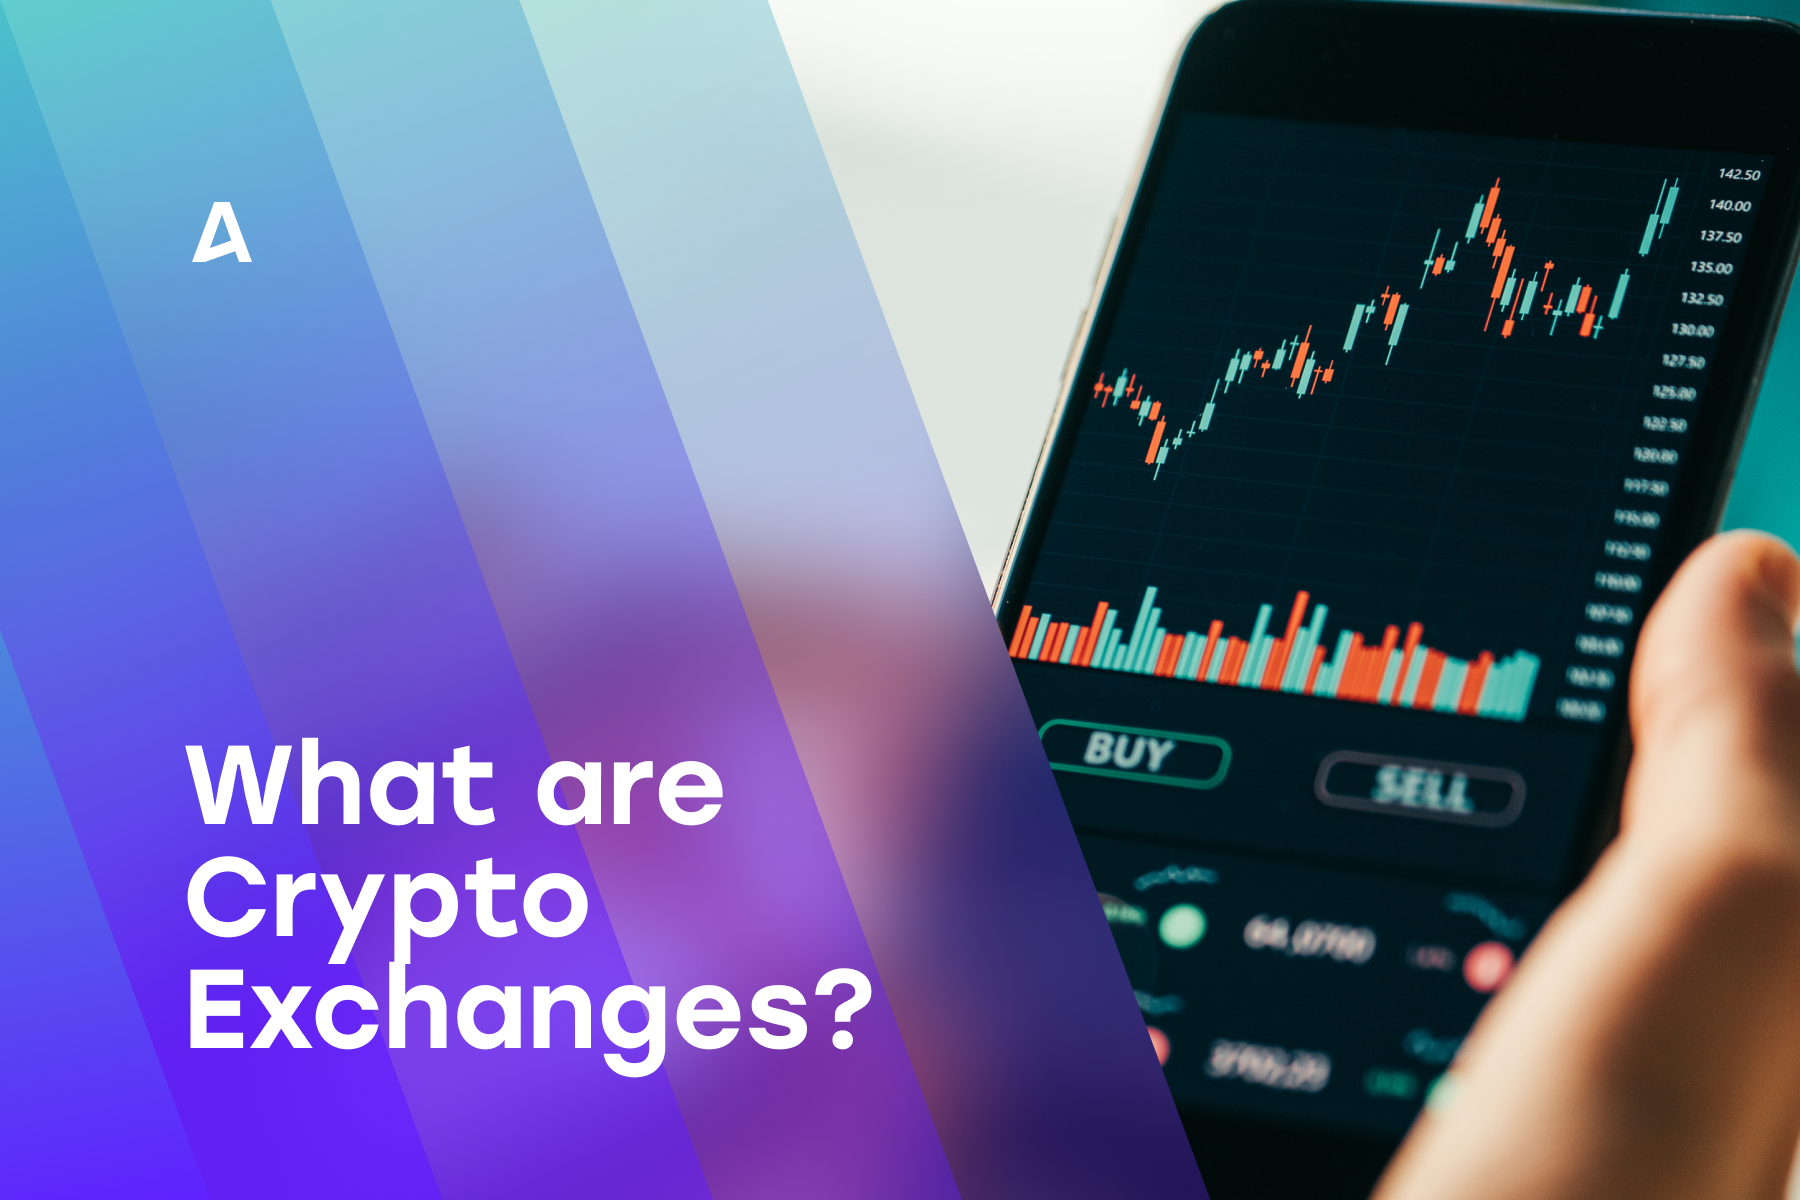 What are Cryptocurrency Exchanges?